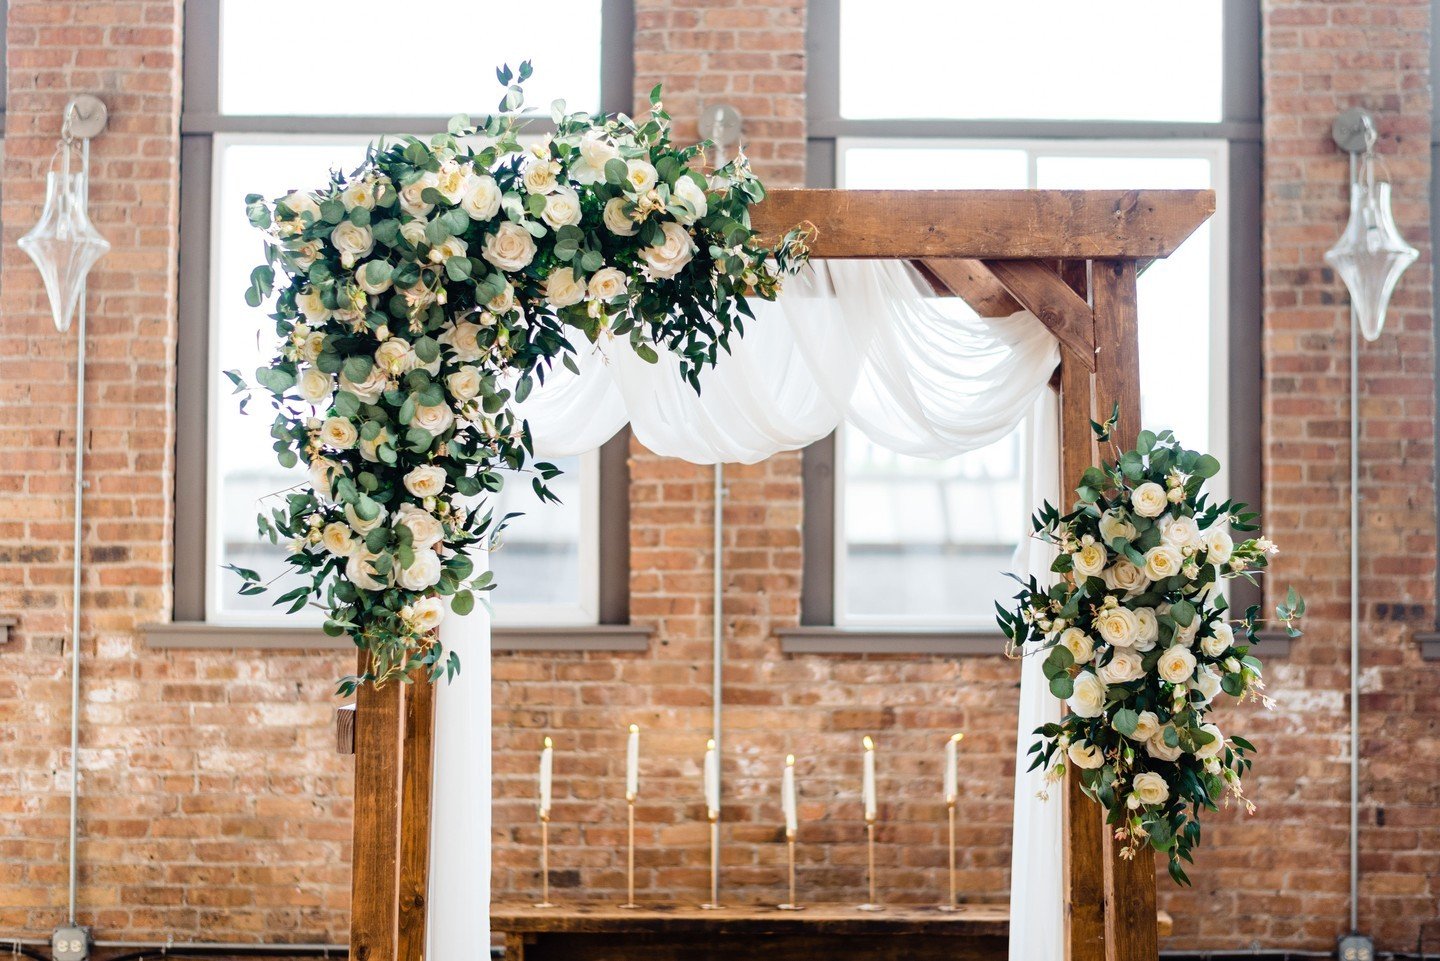 Swooning over this floral arch installation by @primrose_chicago 💕🥰💐

📸 @jenniferlourie
.
.
.
#cityviewloft #chicagoeventvenue #springwedding #weddingceremony #weddingvenue #chicagowedding #weddingarch #weddingflowers #ChicagoEvents #tablescapes 